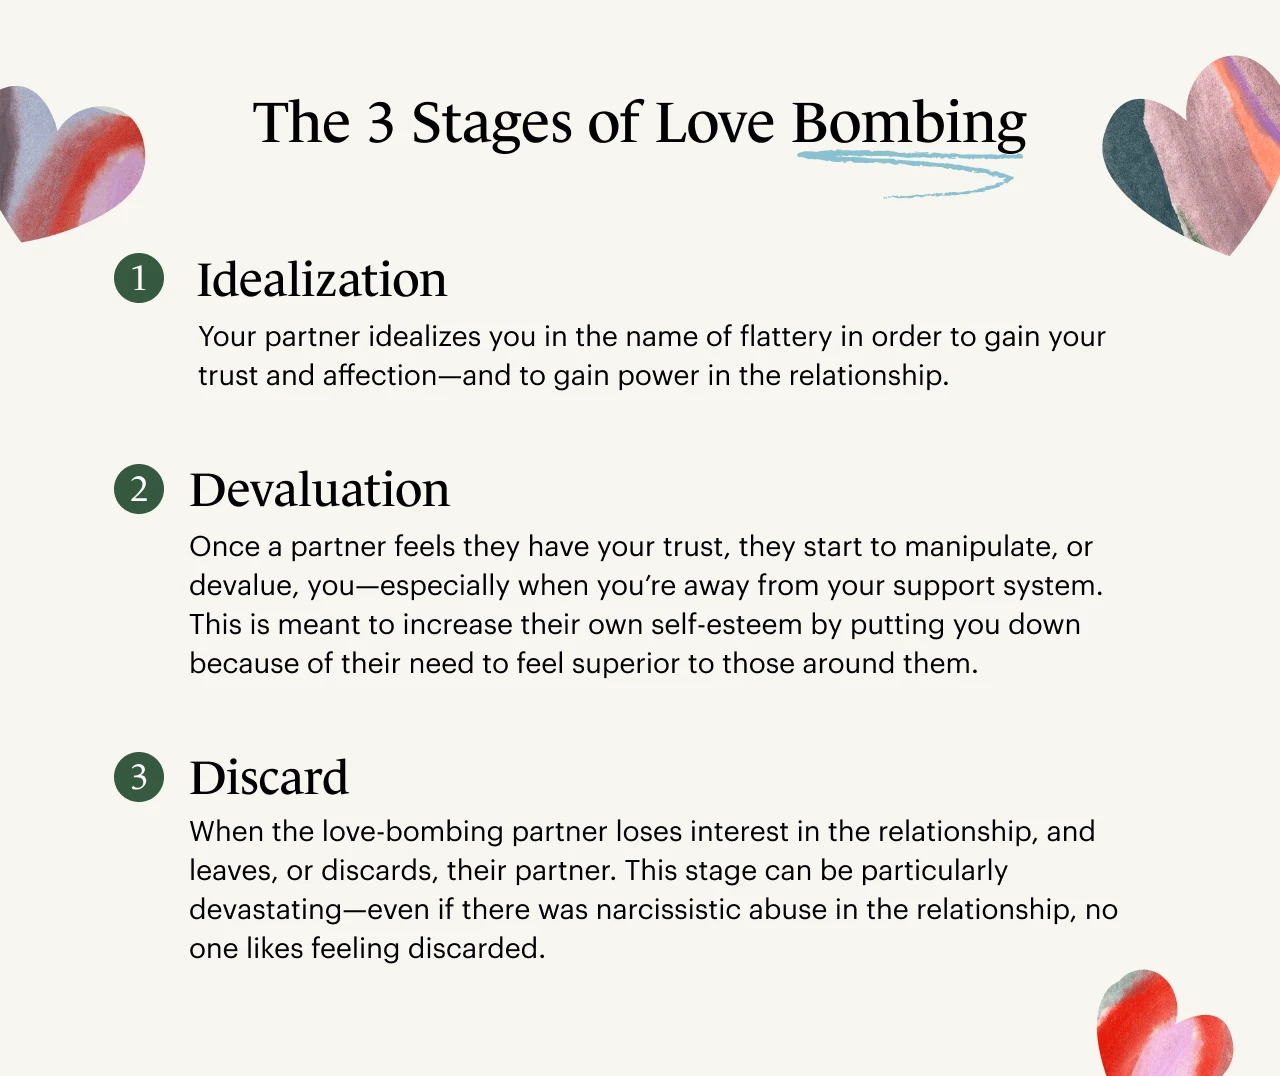 A Monarch original illustration and list of the 3 stages of love bombing.
